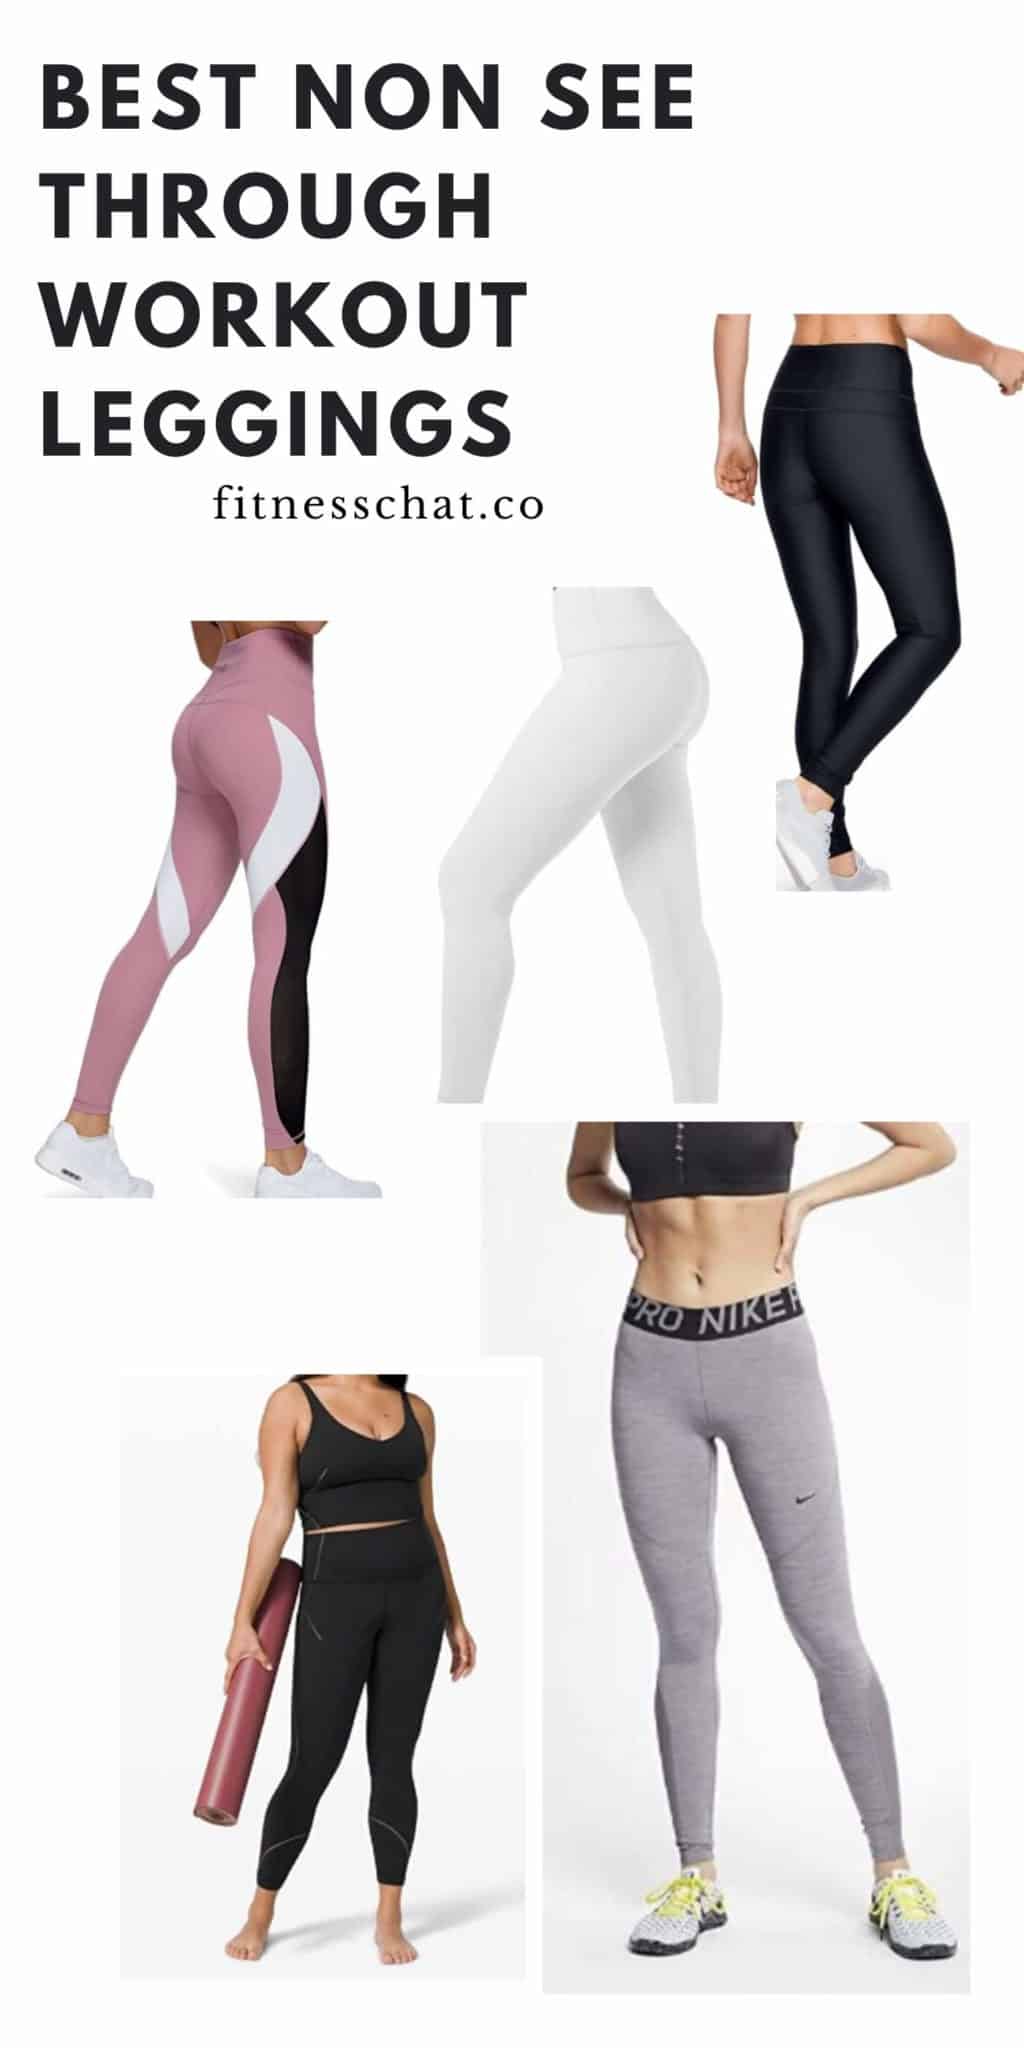 Best gym leggings - great fitting fitness tights to work out in